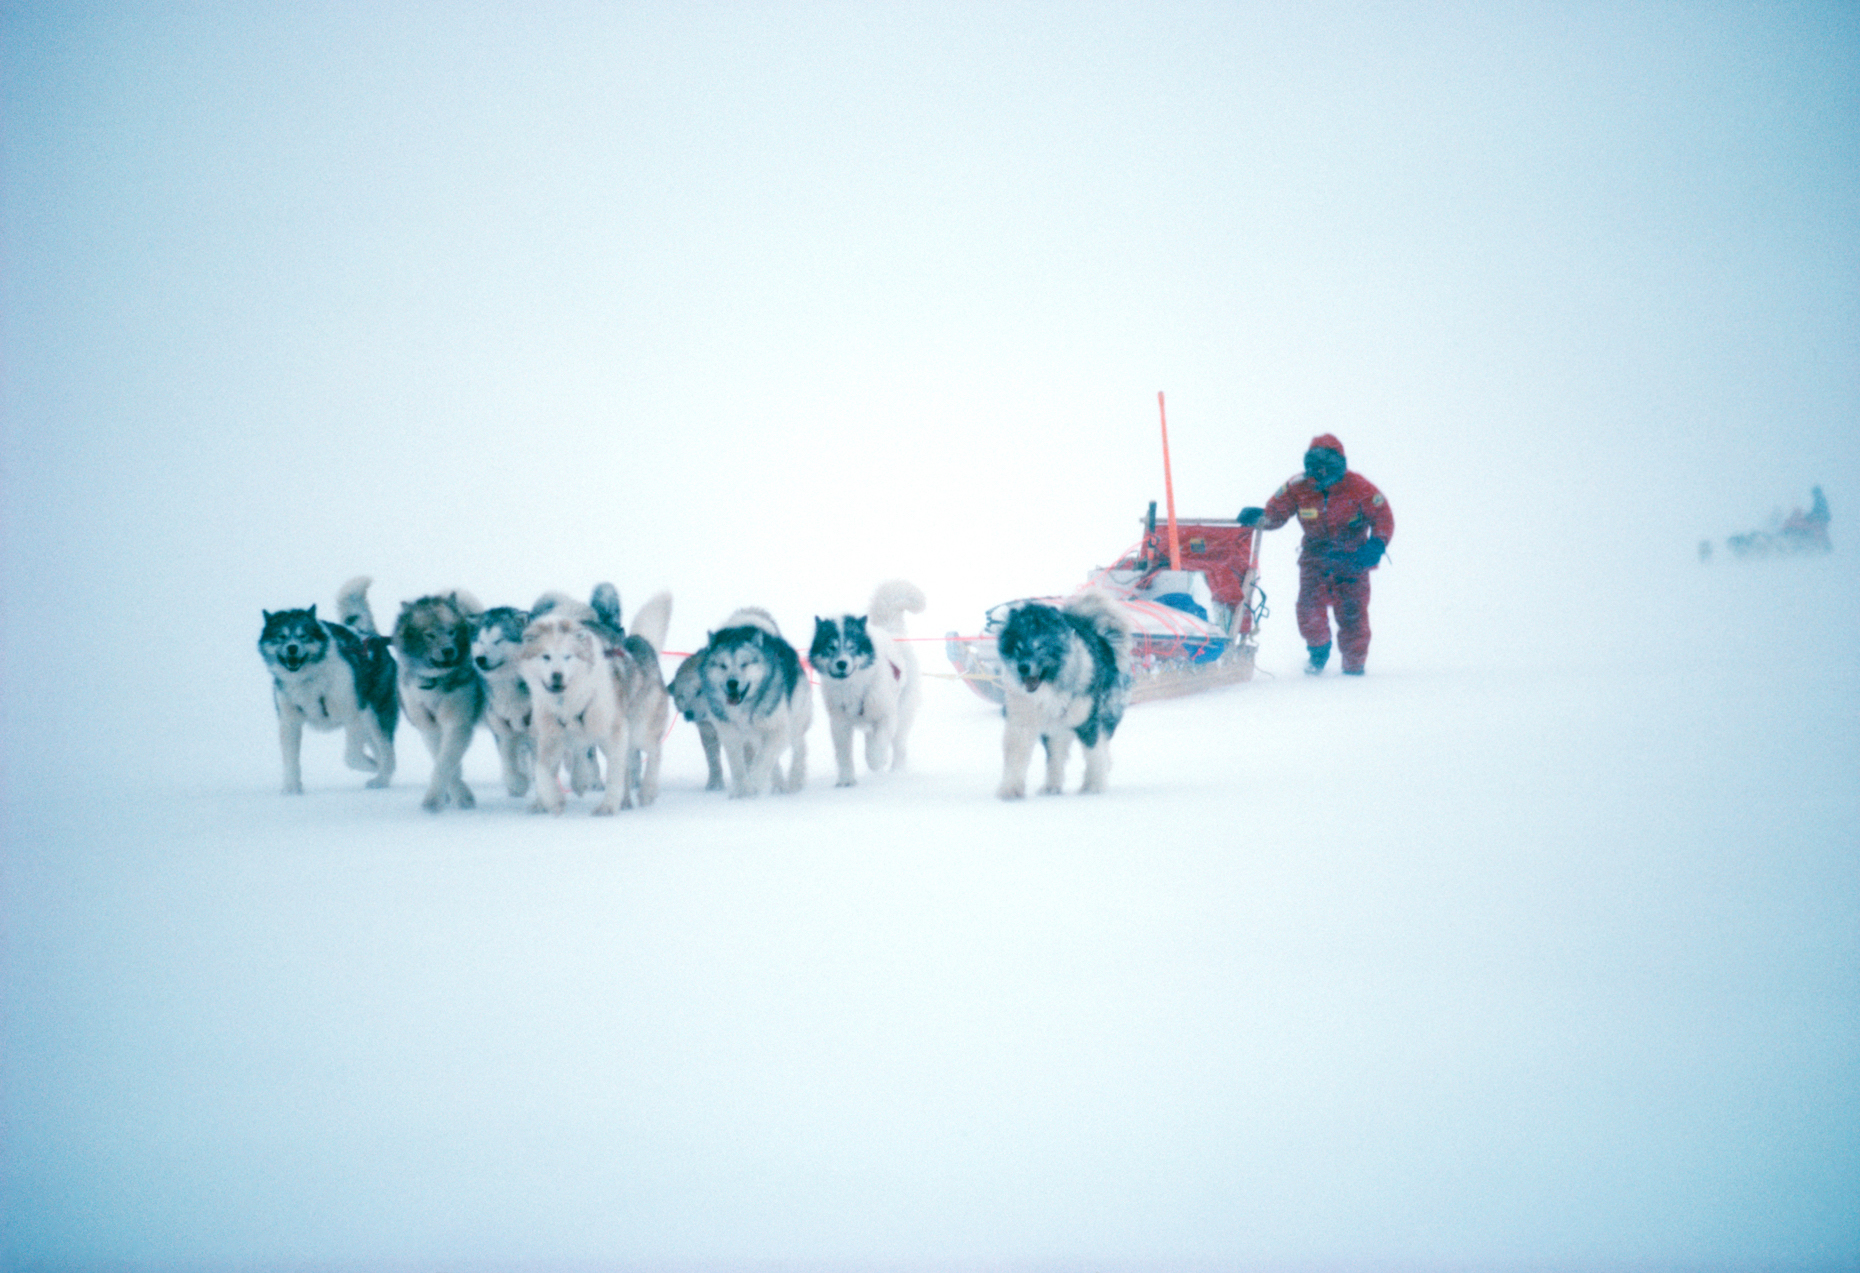 Dogsled team and musher training in harsh winter conditions for an unsupported expedition to the North Pole.